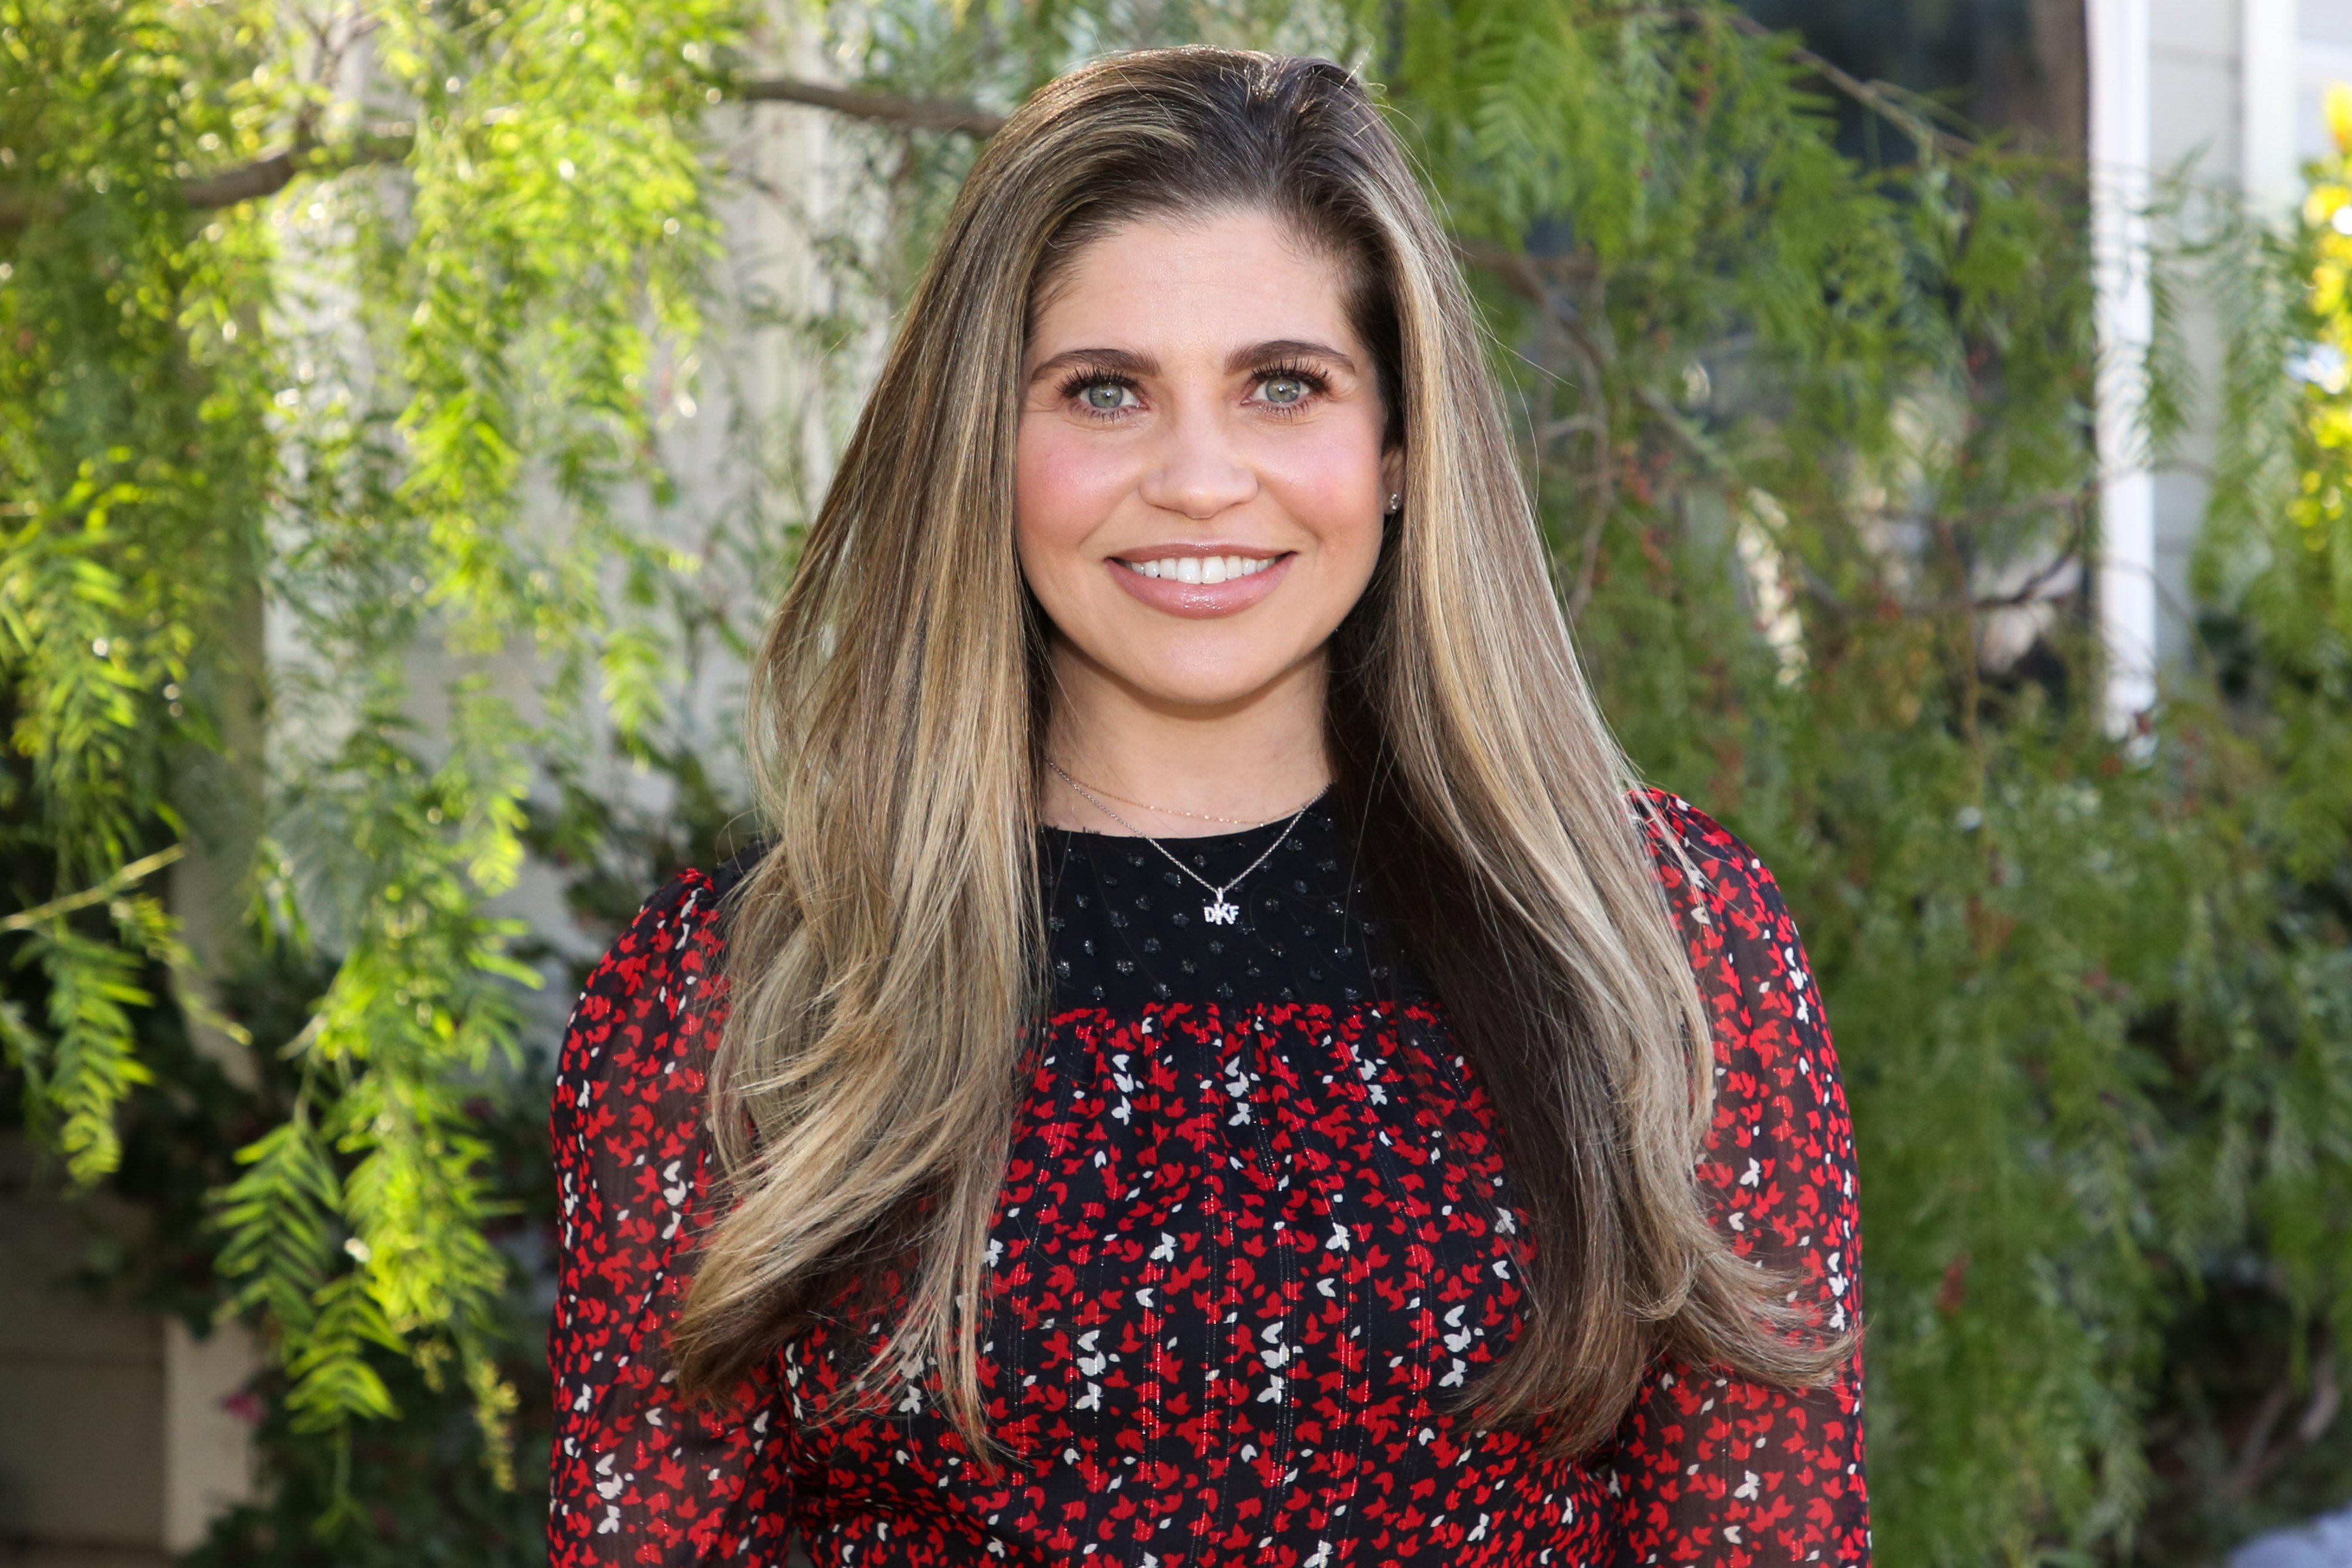 Actress Danielle Fishel visits Hallmark Channel's "Home & Family" at Universal Studios Hollywood on January 28, 2020 in Universal City, California | Photo: Getty Images